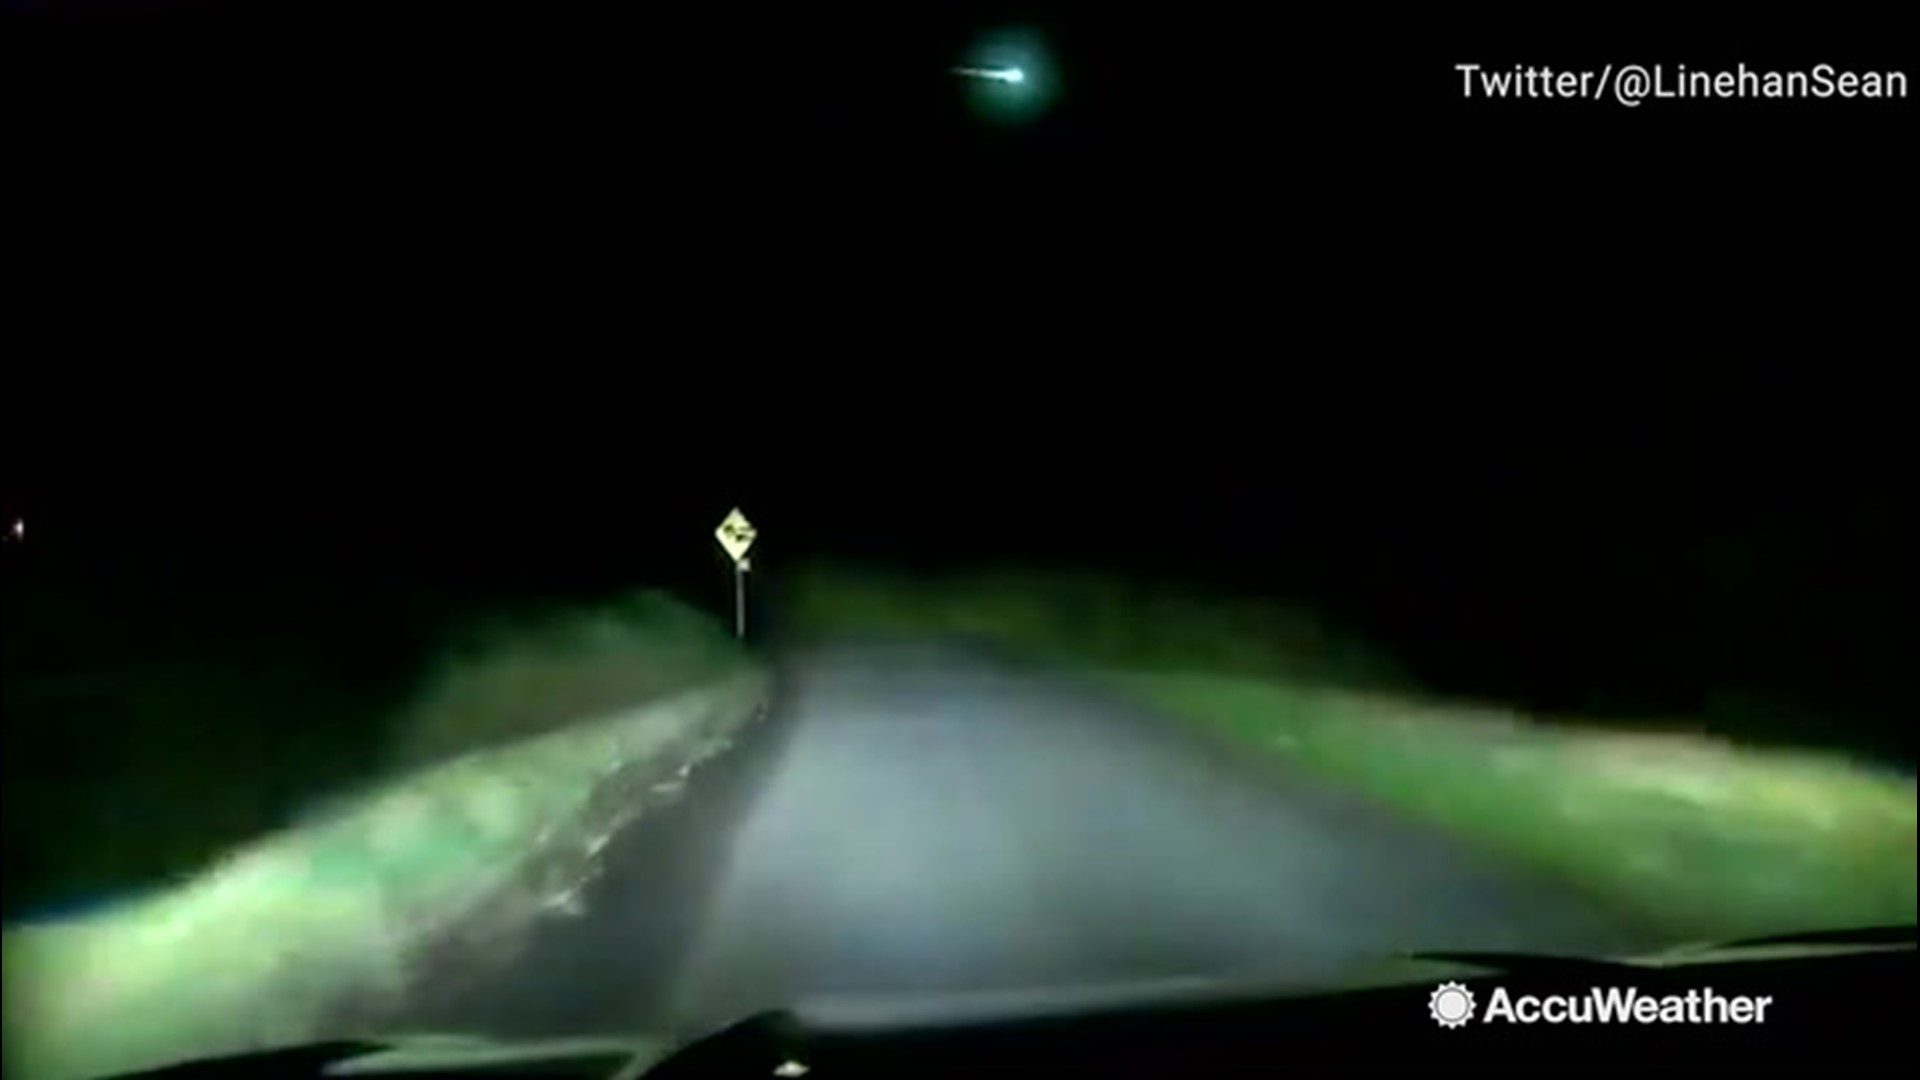 In Banteer, Ireland, residents were treated to the sight of a bright fireball streaking across the sky on Oct. 28.